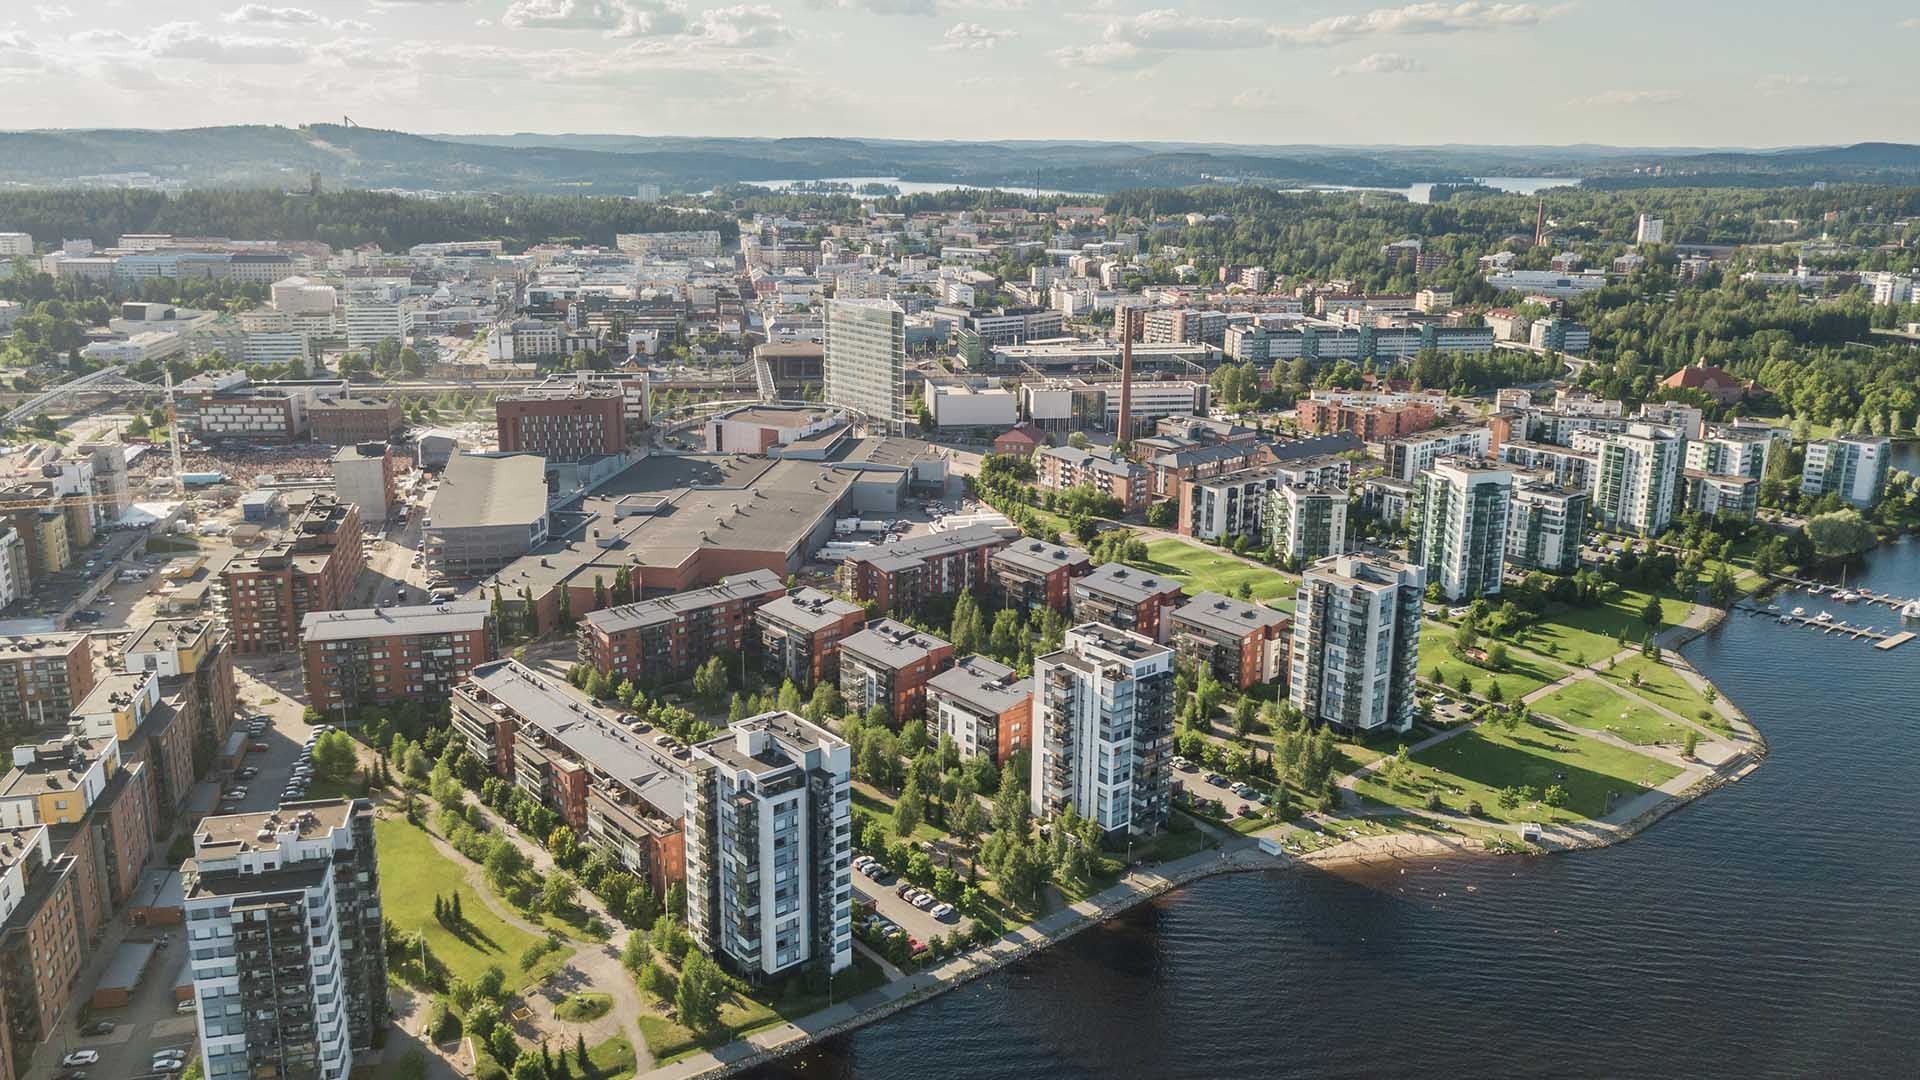 AINS Group to open an office in Jyväskylä – a new partner for sustainable renovation projects in the region